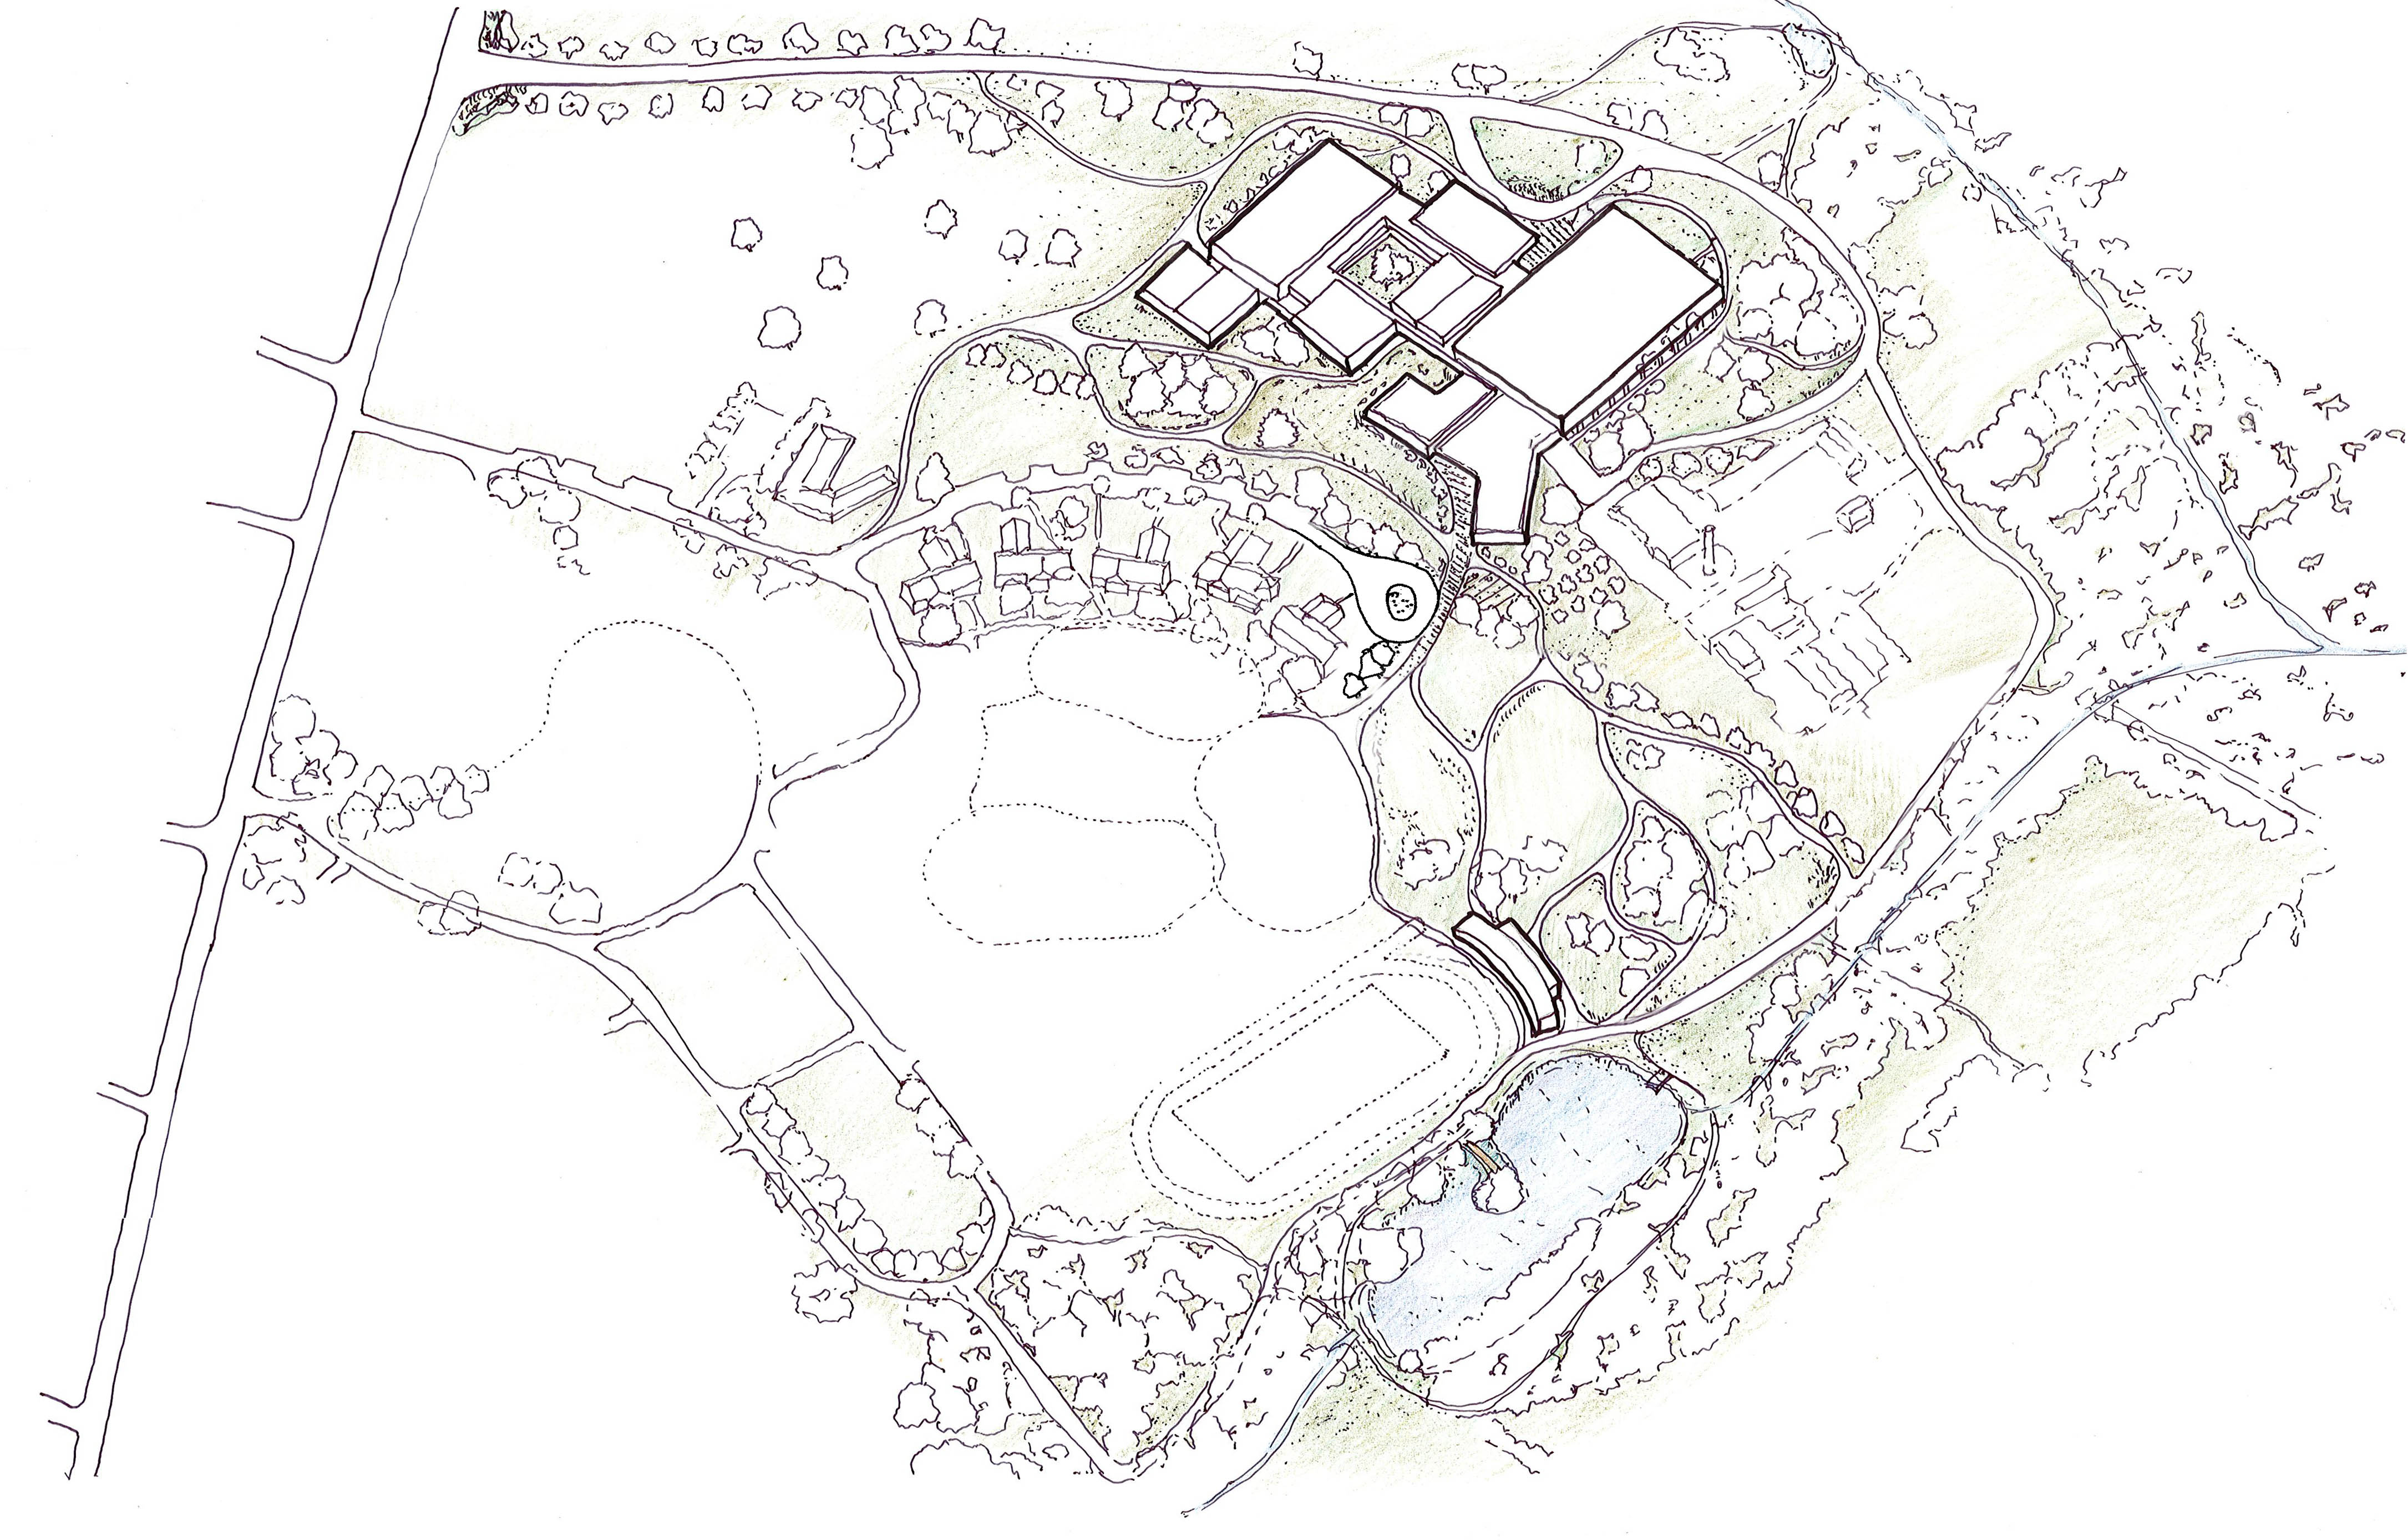 North Site Aerial with field house and new landscap